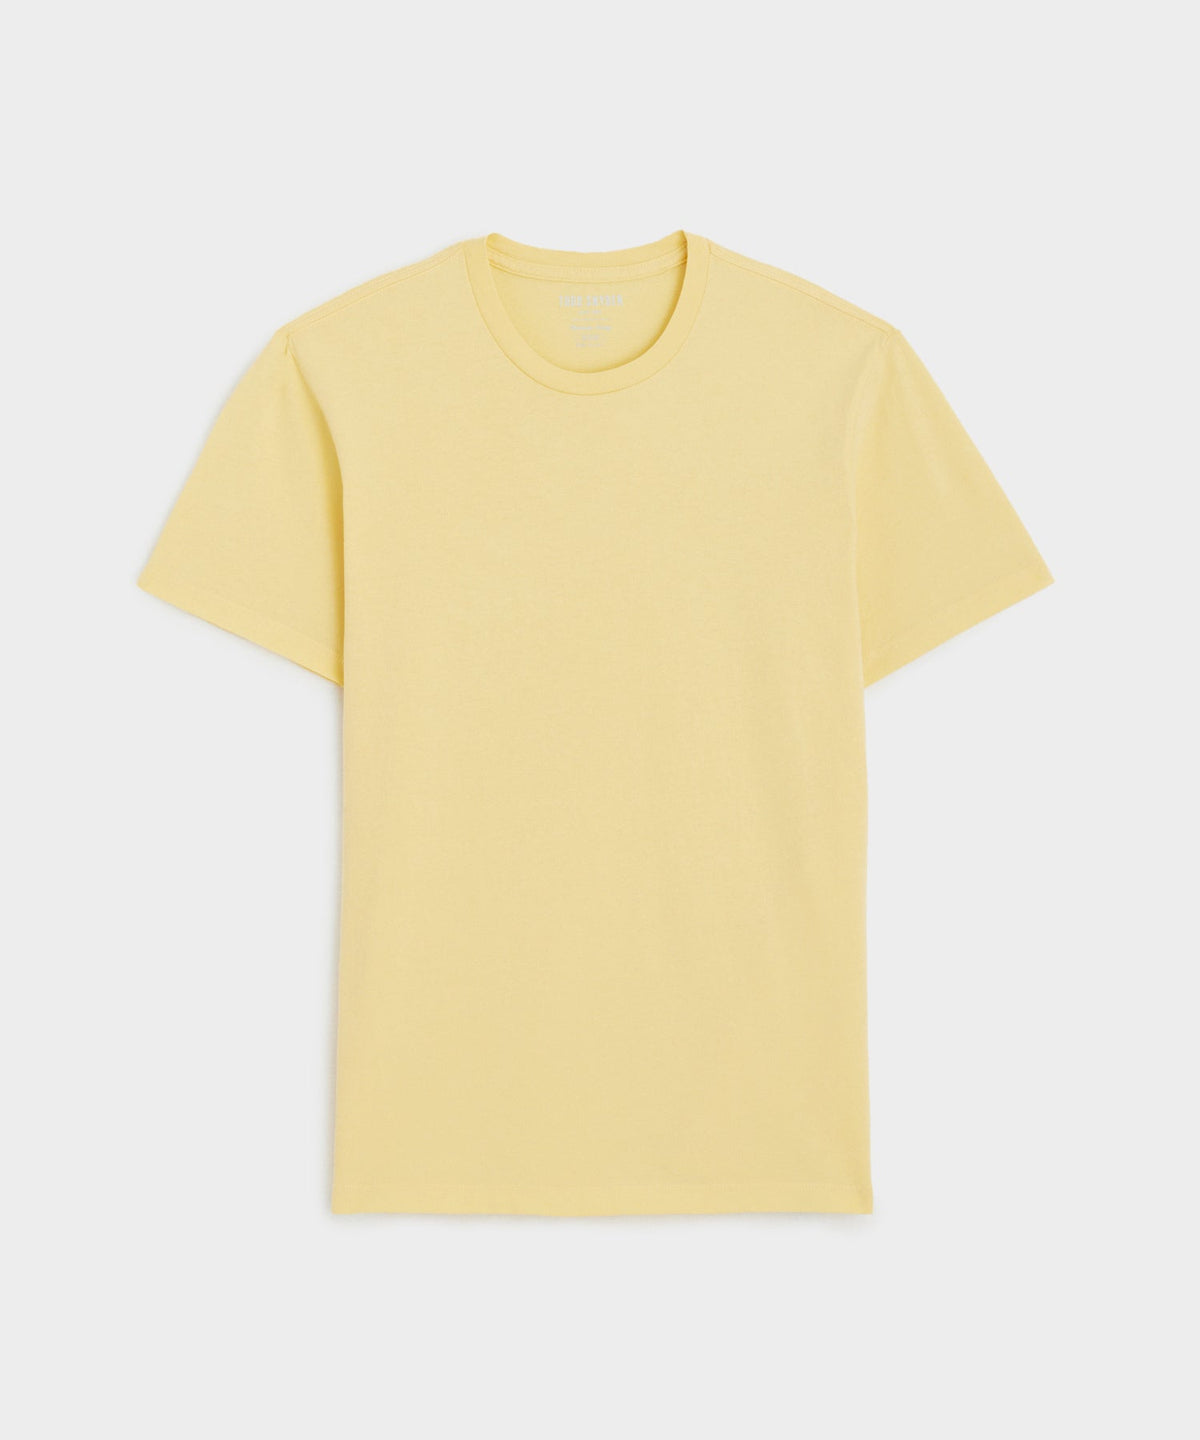 Made In L.A. Premium Jersey T-Shirt in Lemon